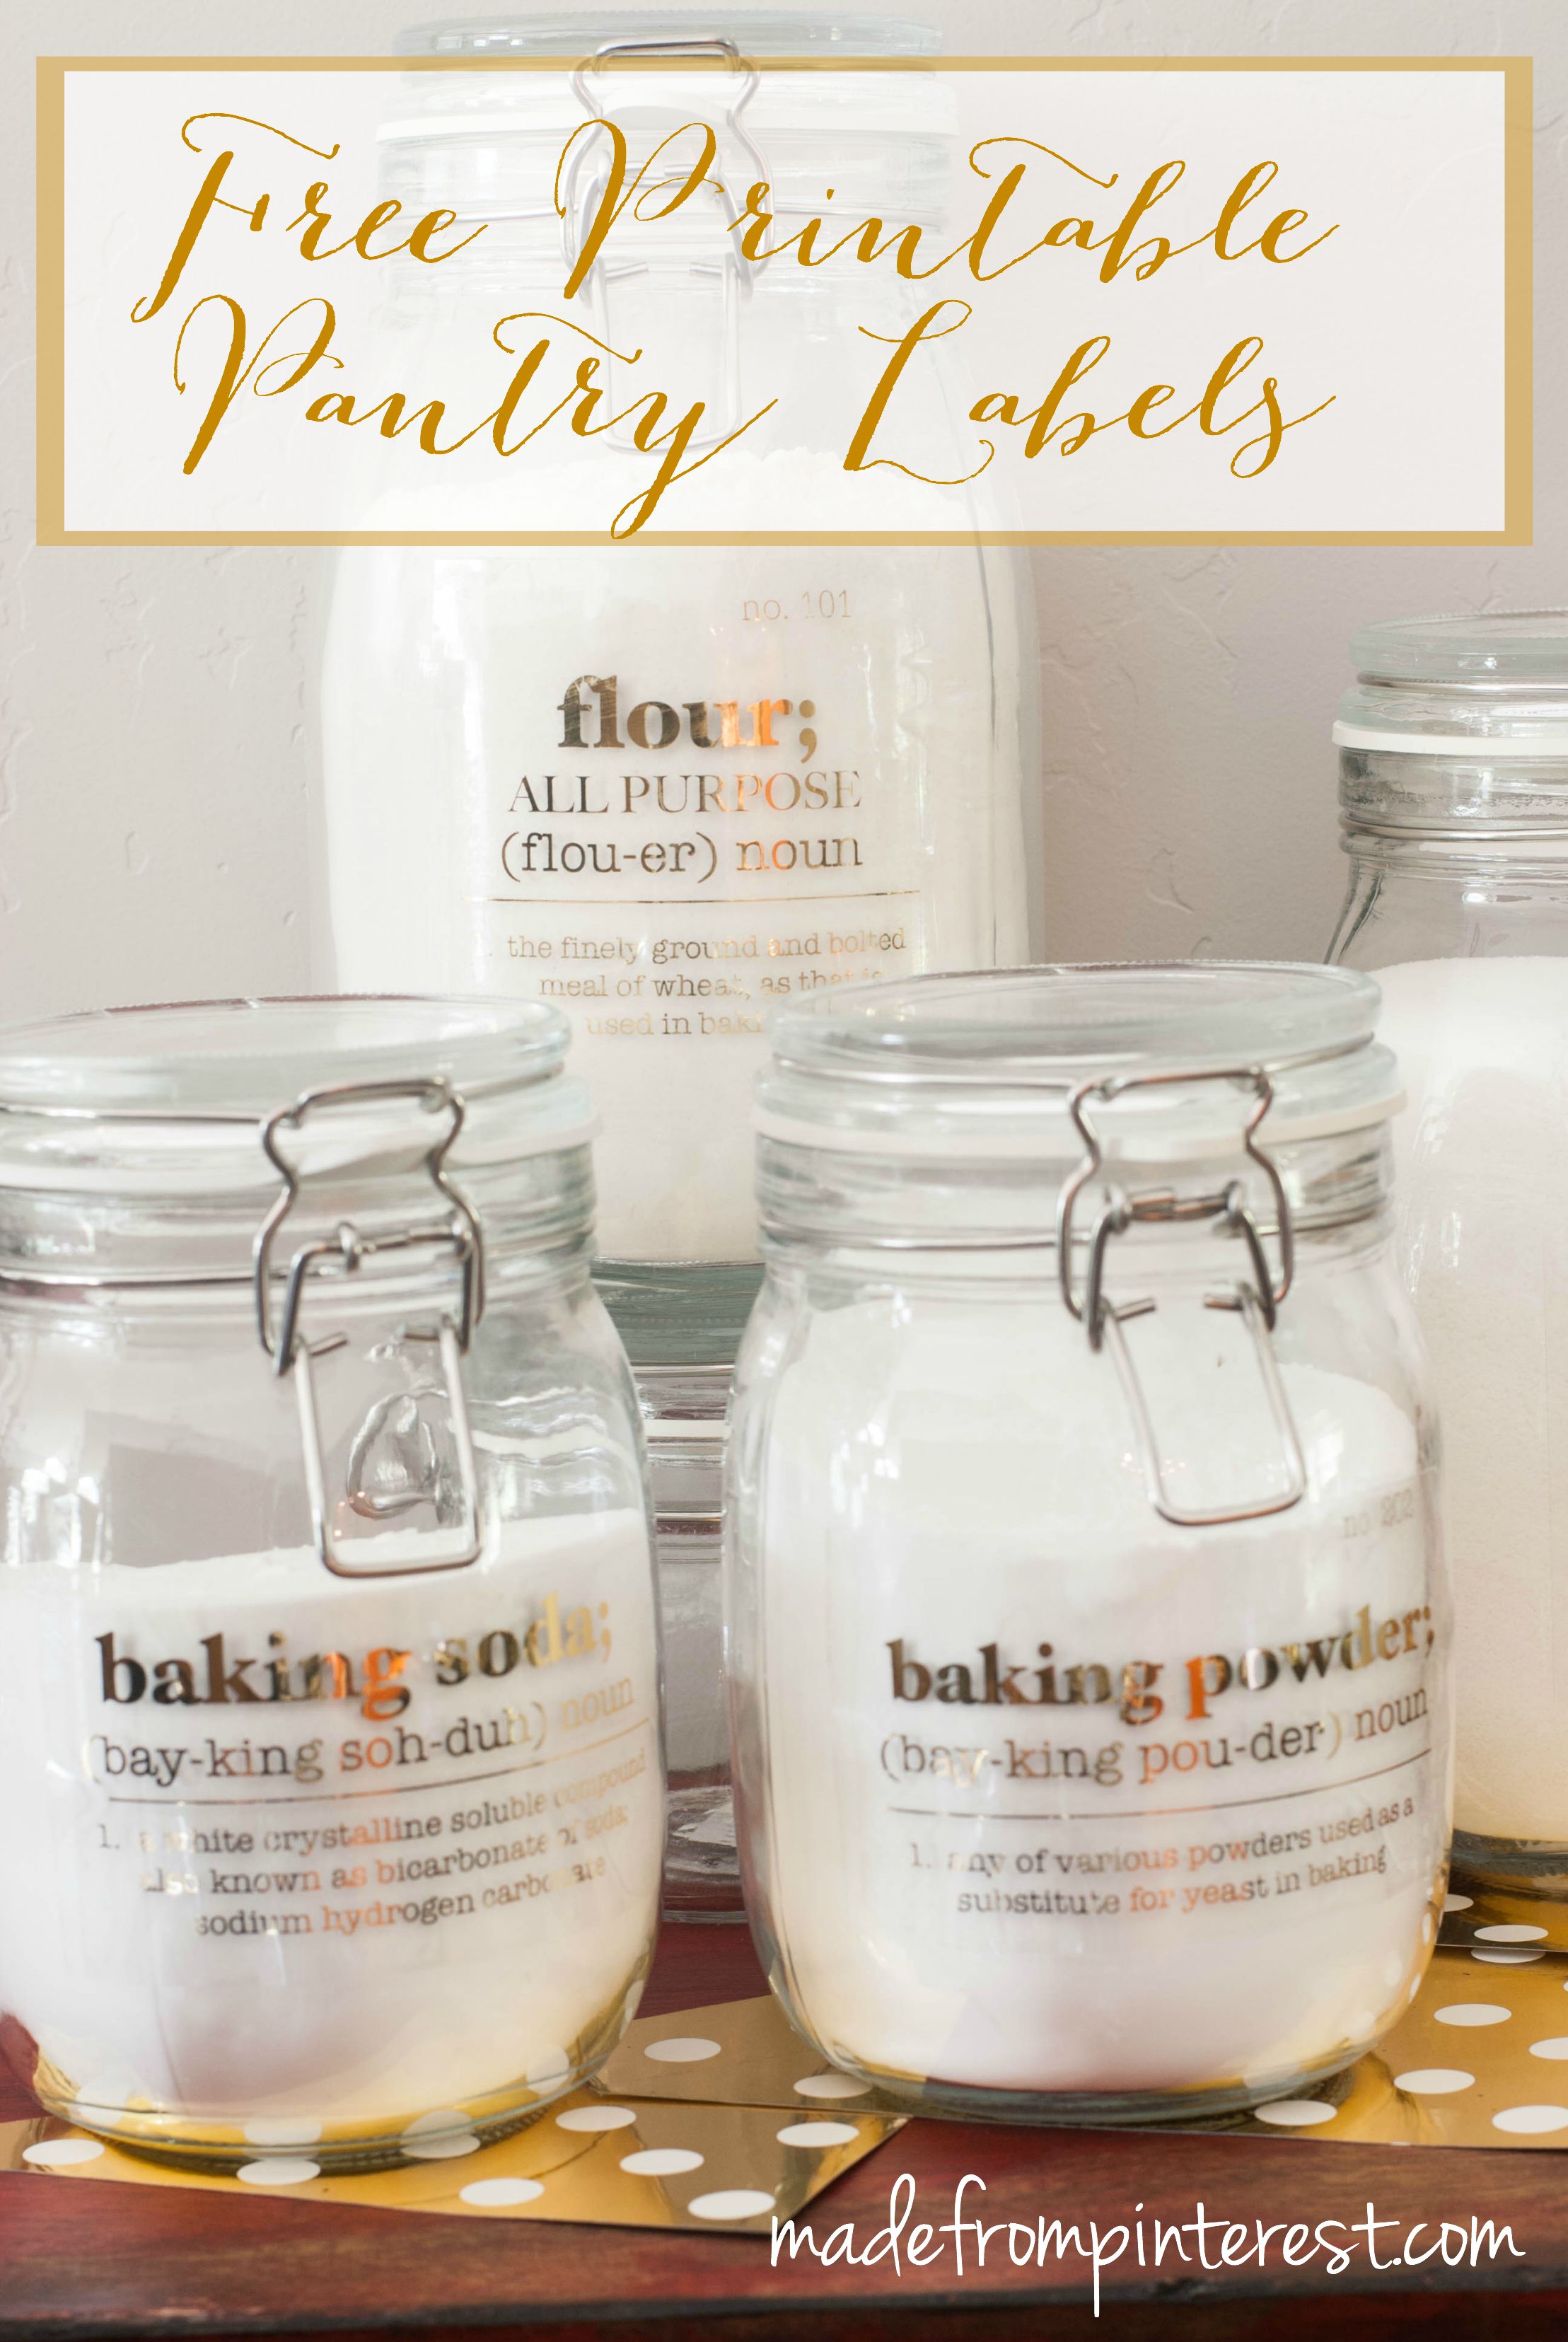 Free kitchen printable labels for canisters or more